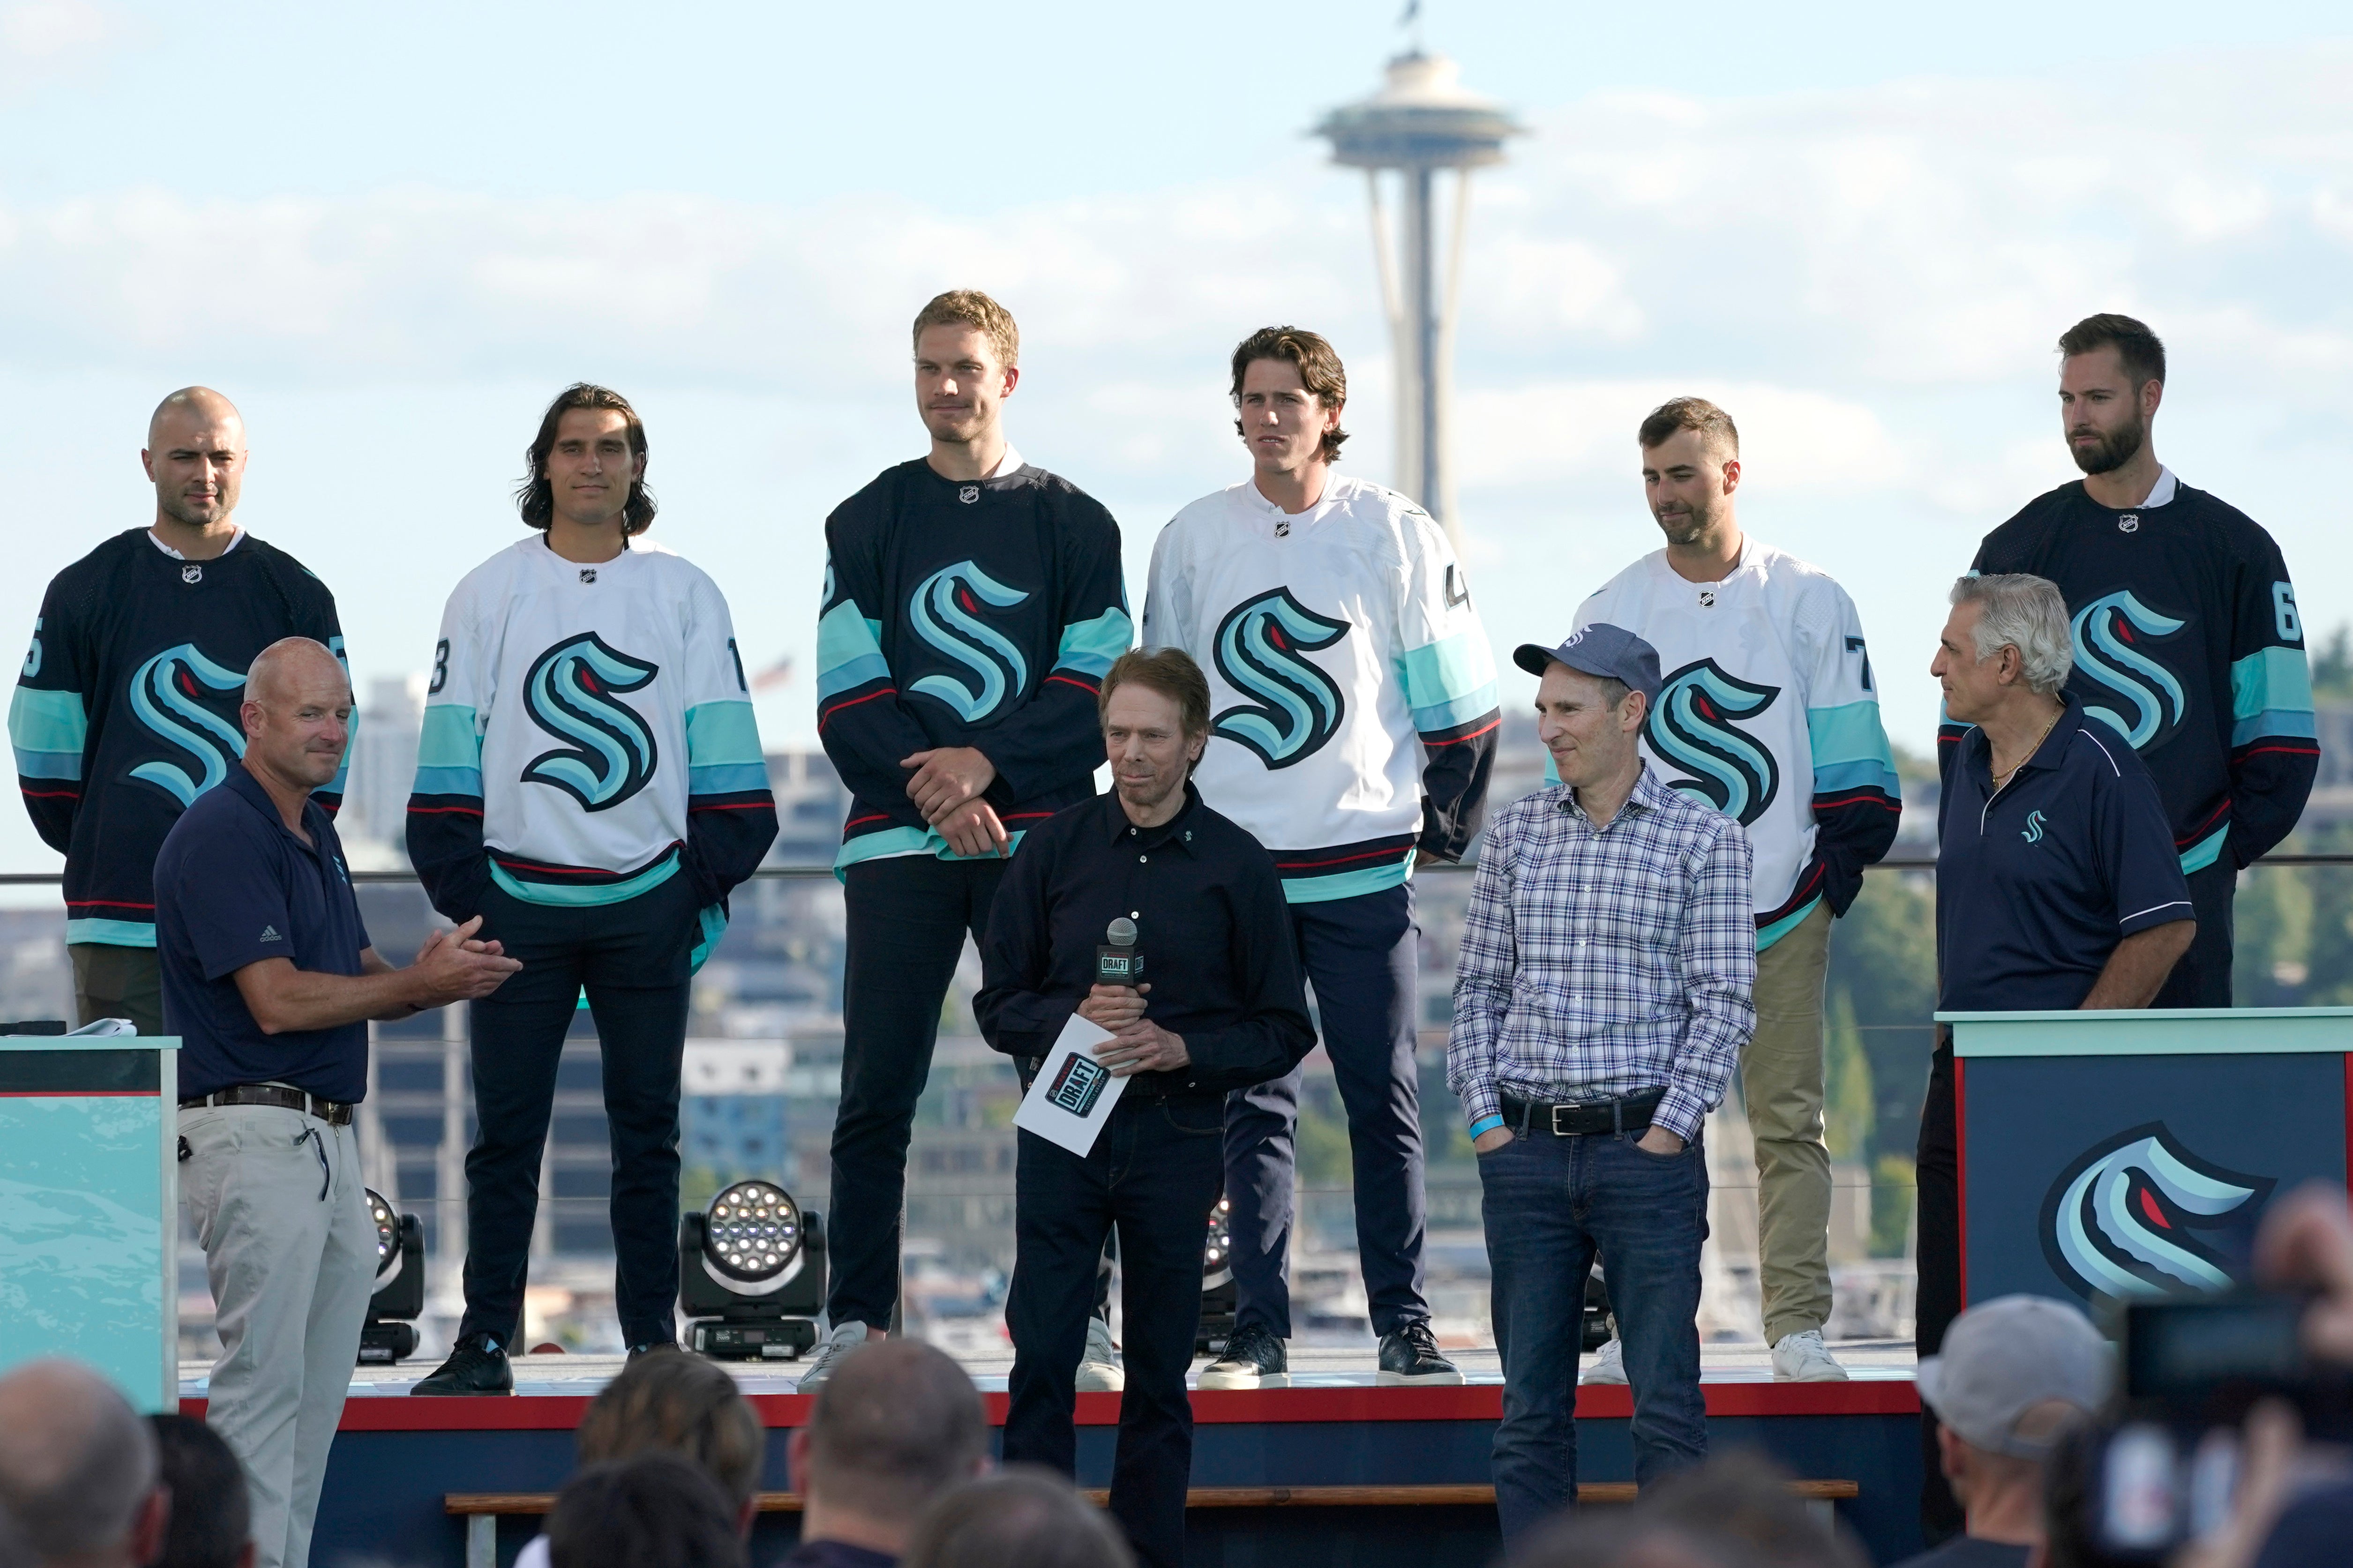 The non-sport fan's unofficial guide to the Seattle Kraken, hockey culture  and the NHL